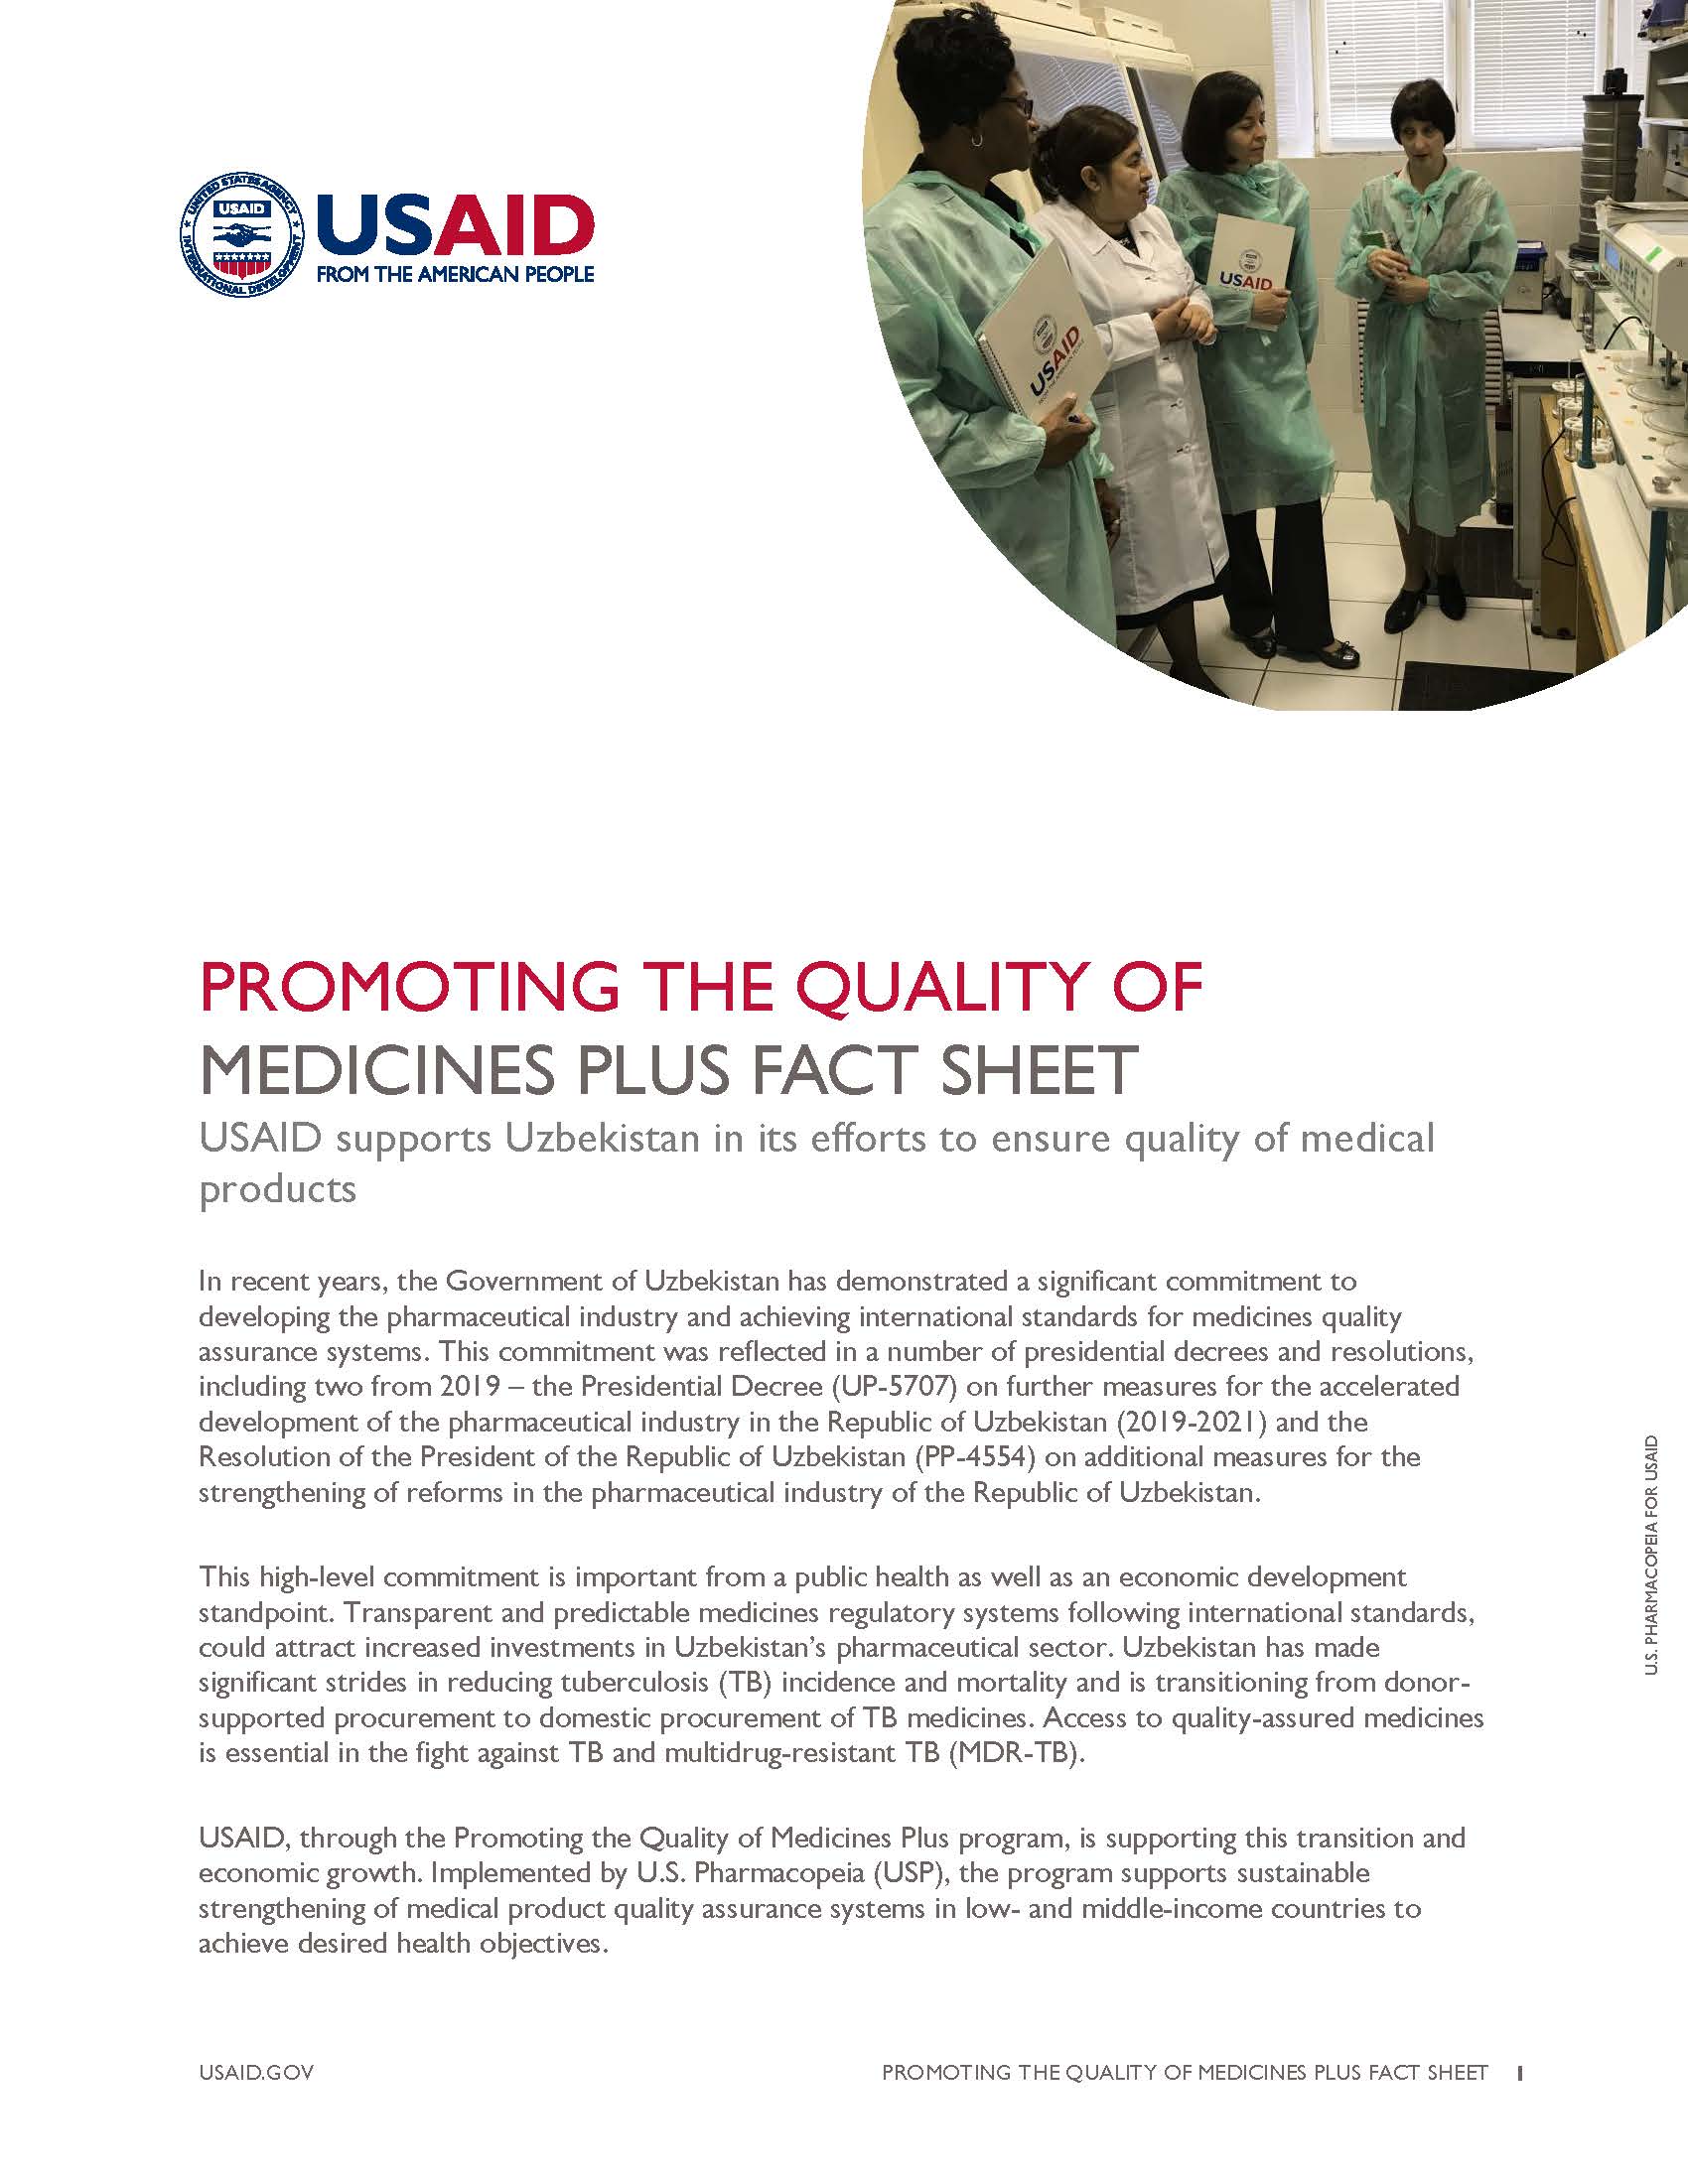 Promoting the Quality of Medicines Plus Fact Sheet